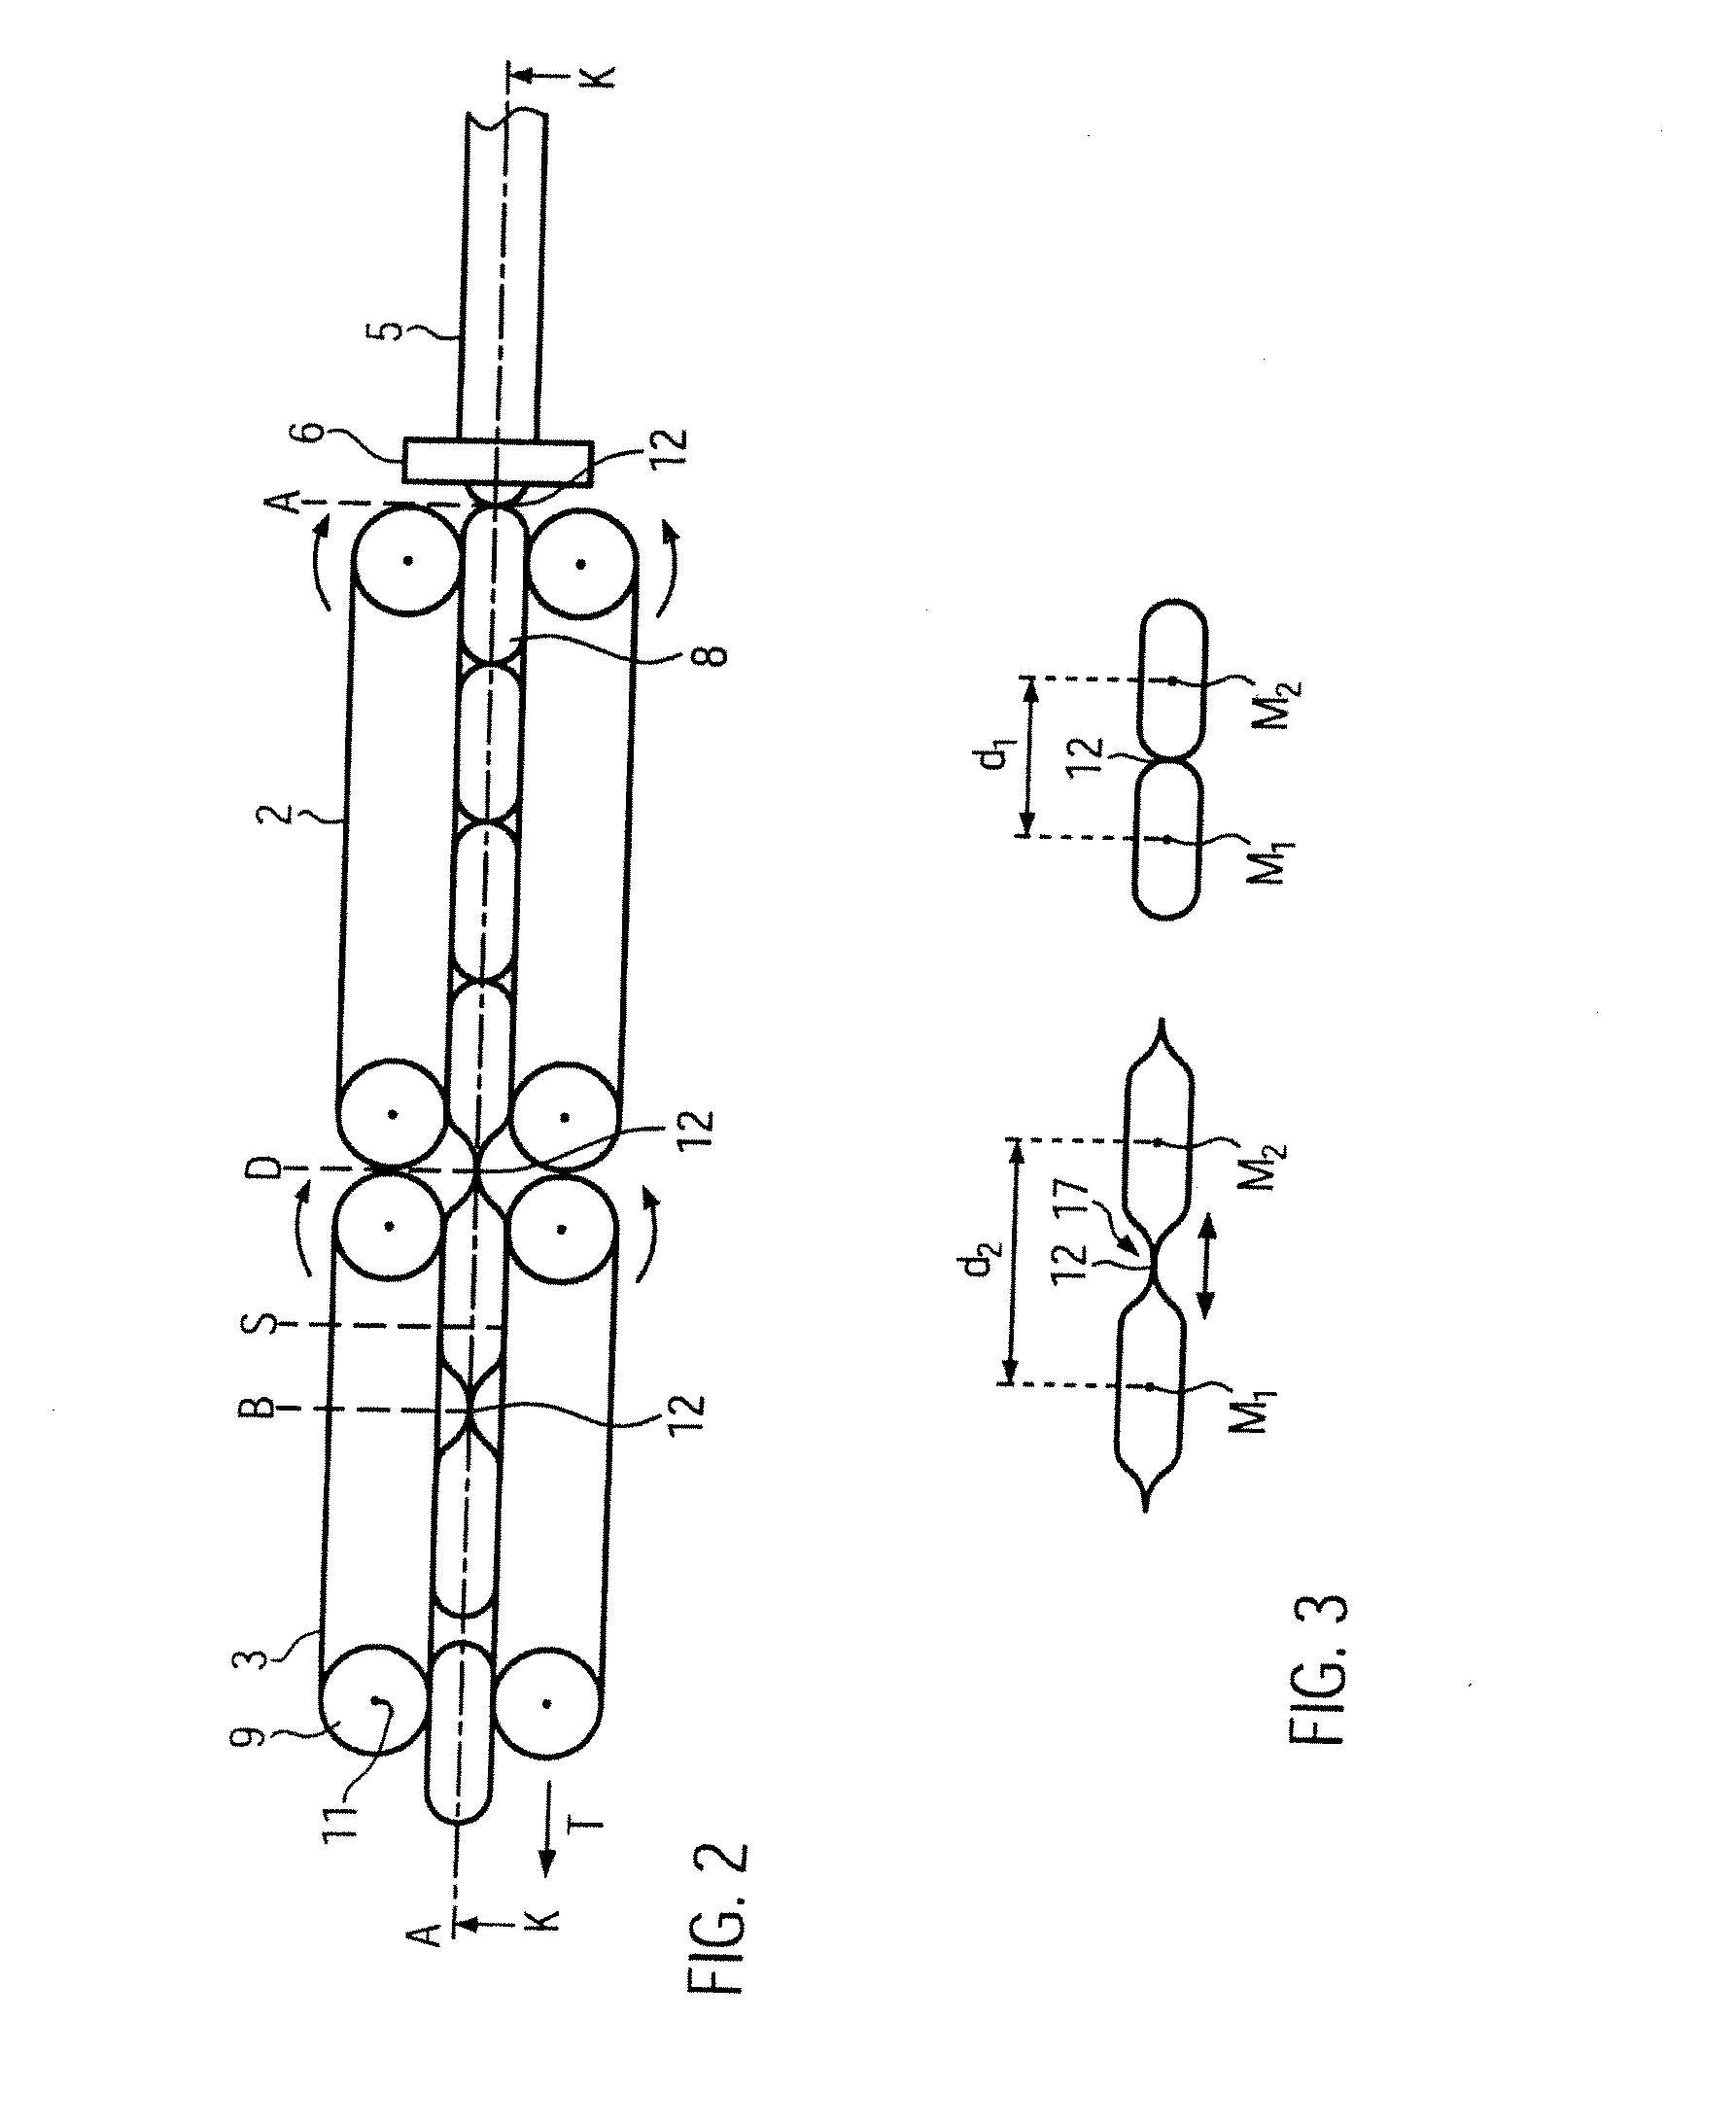 Device and method for parting sausage chains